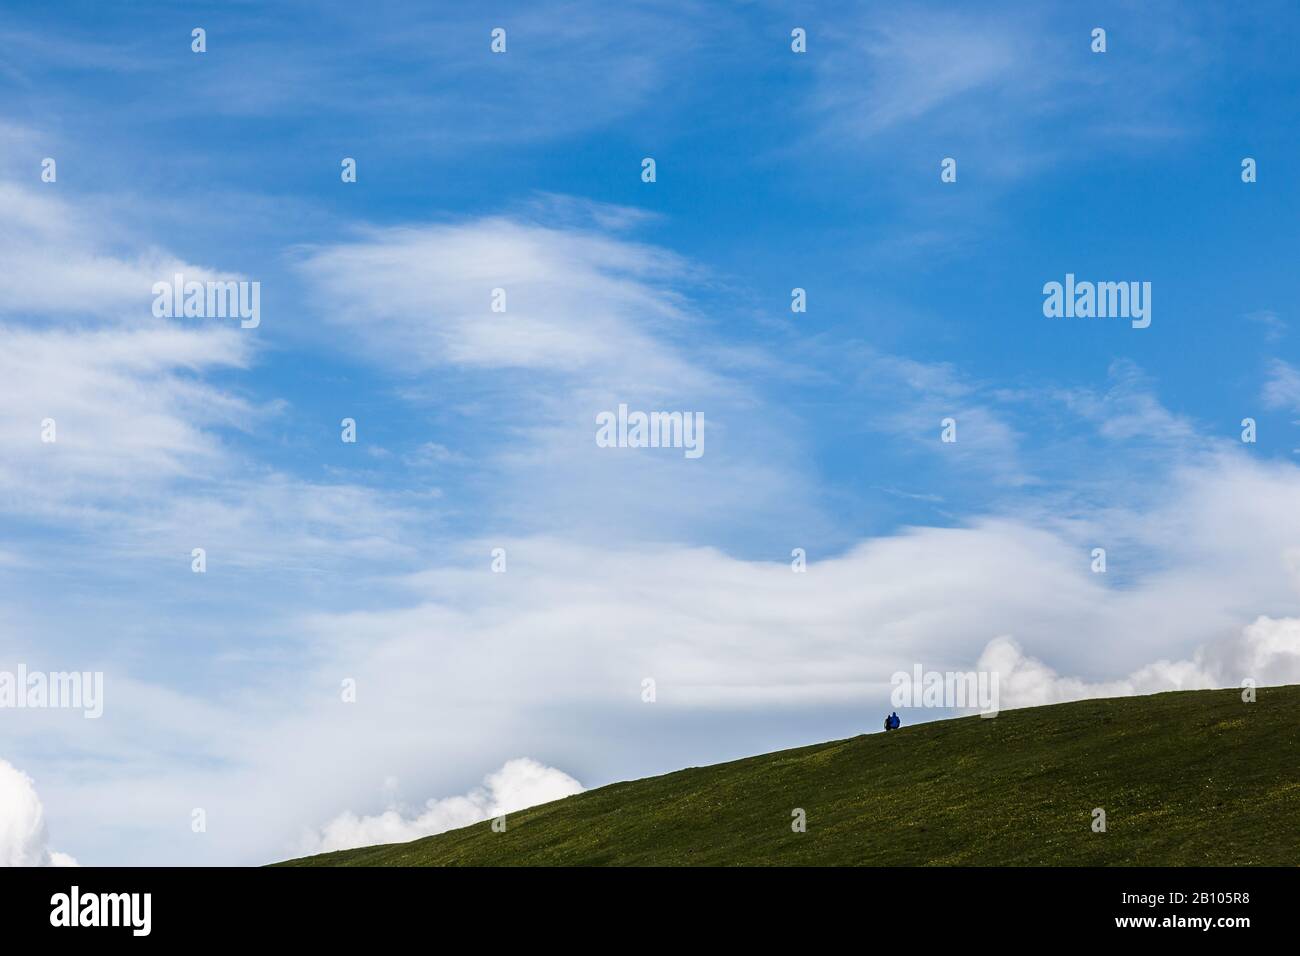 Mountains view in spring with green meadows, blue sky and two distant people Stock Photo